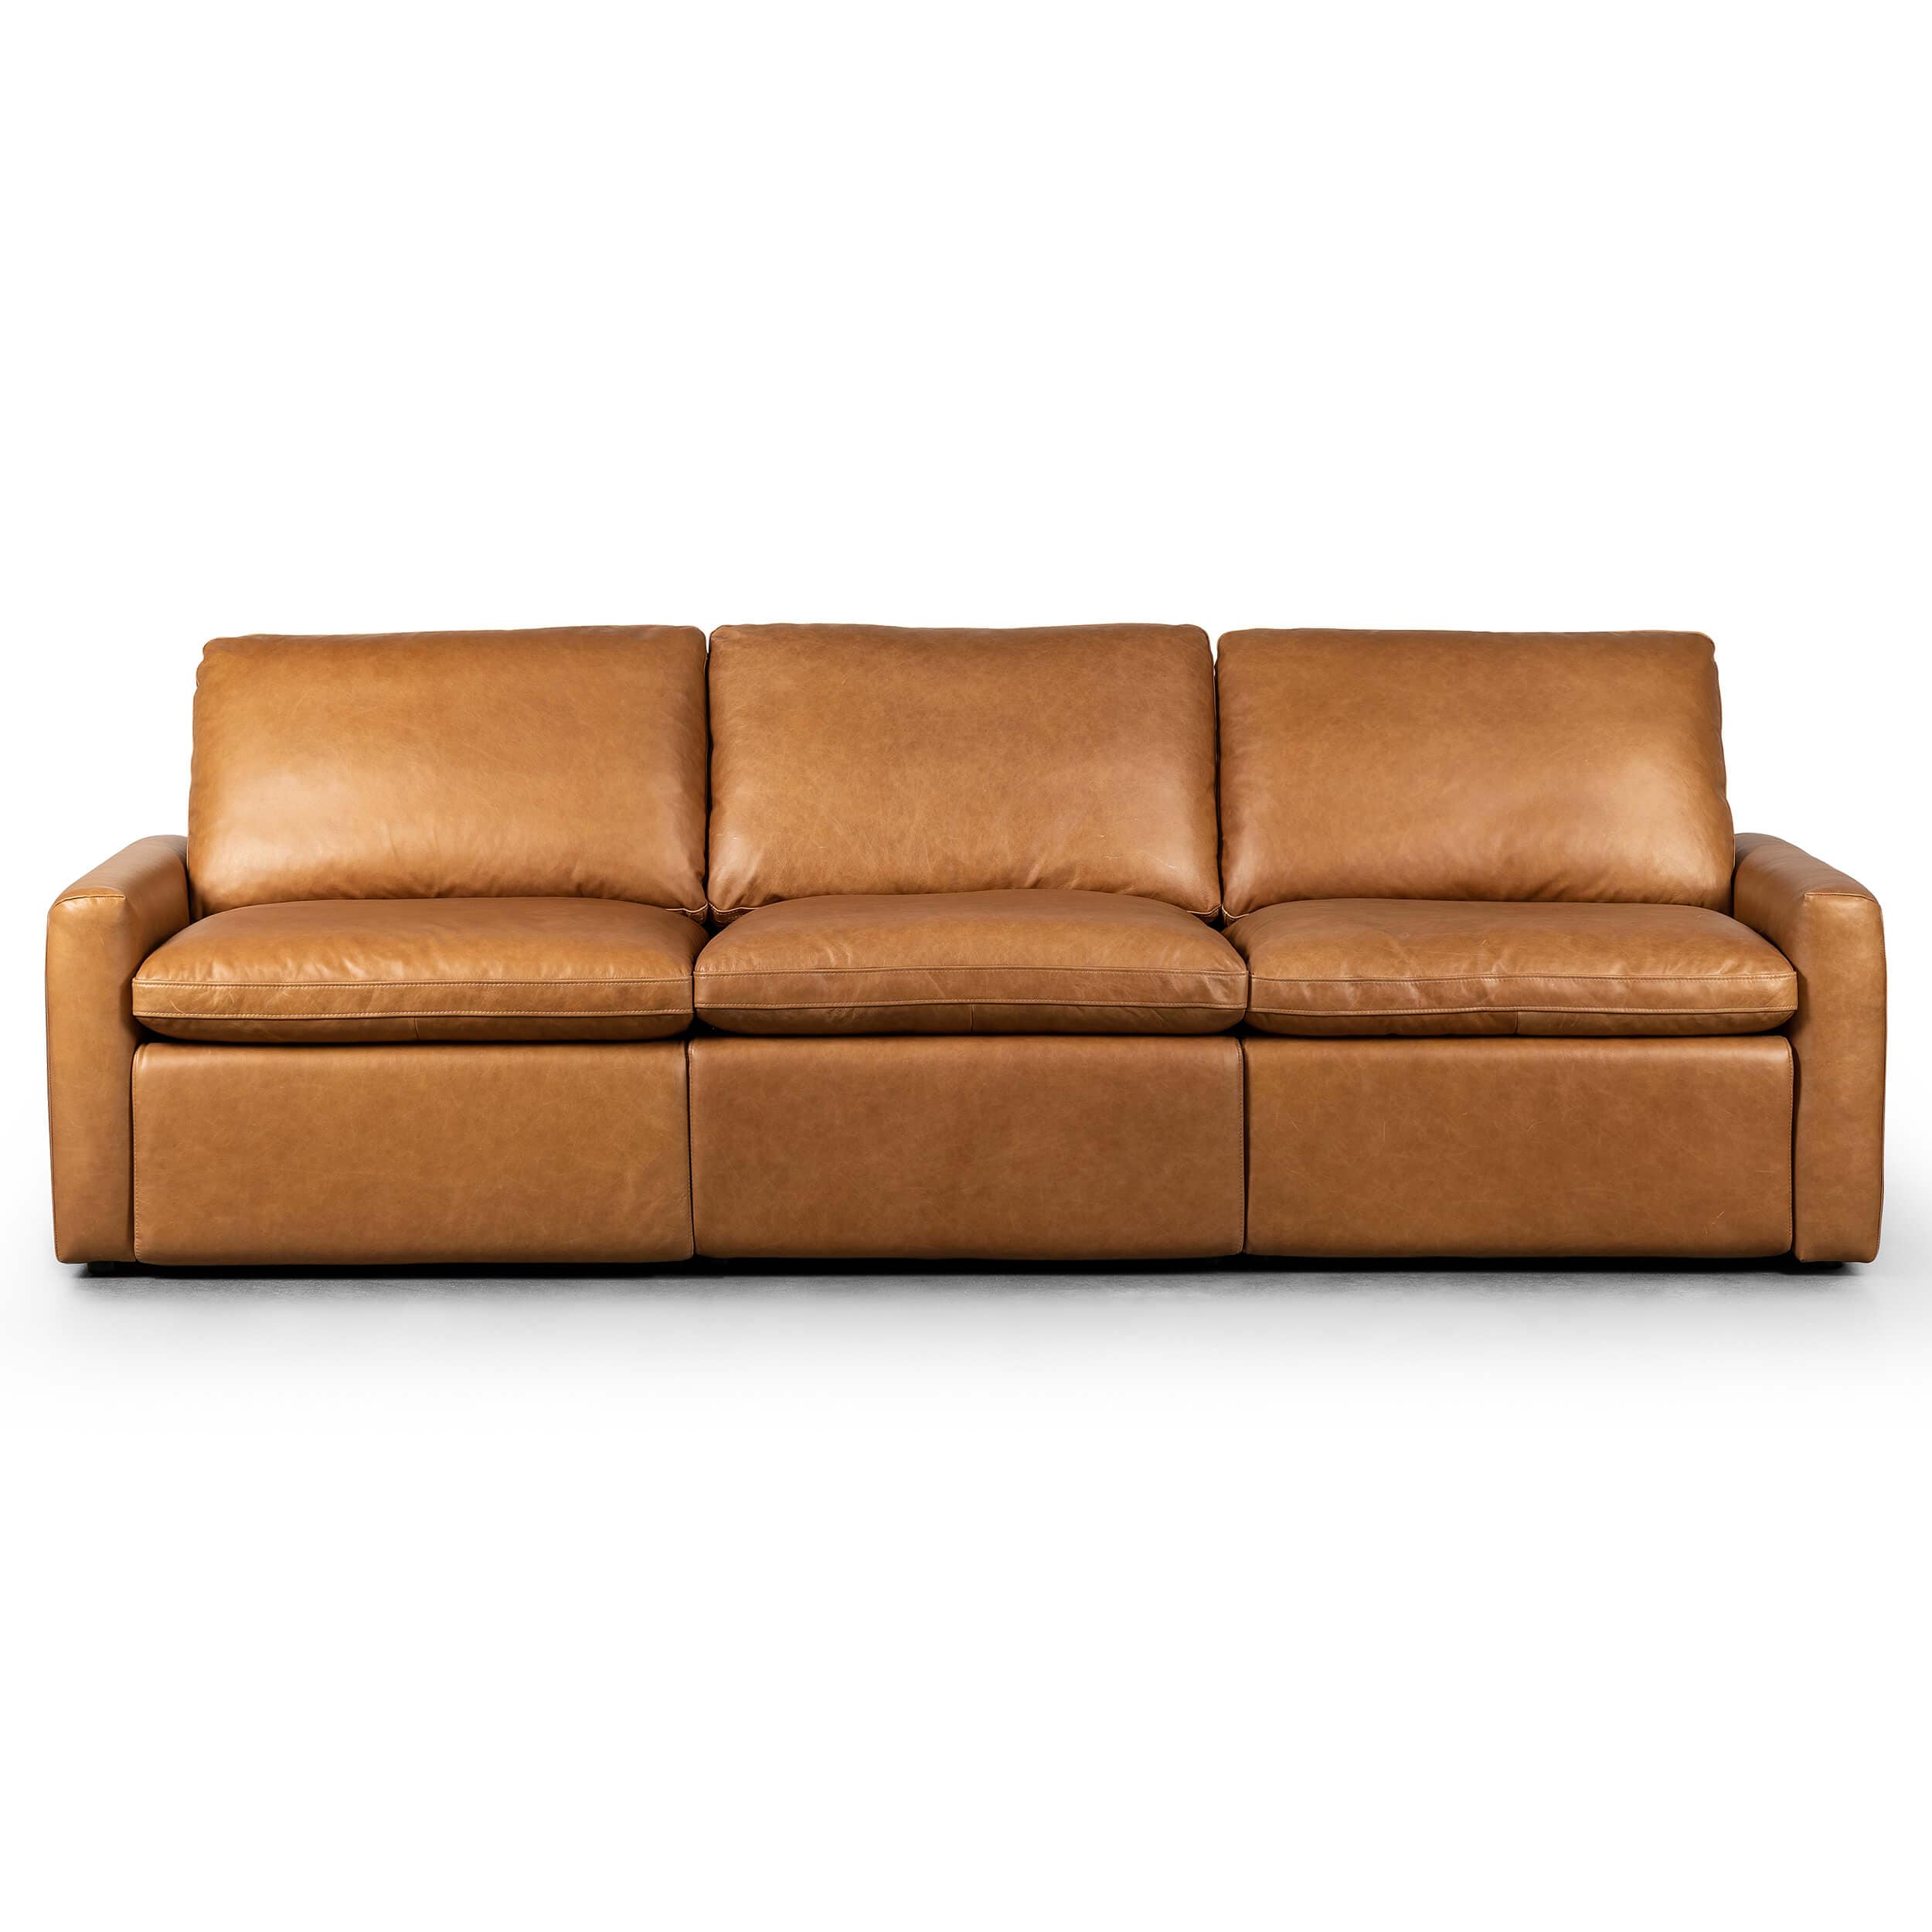 Image of Tillery 3 Piece Power Recliner Sectional, Sonoma Butterscotch